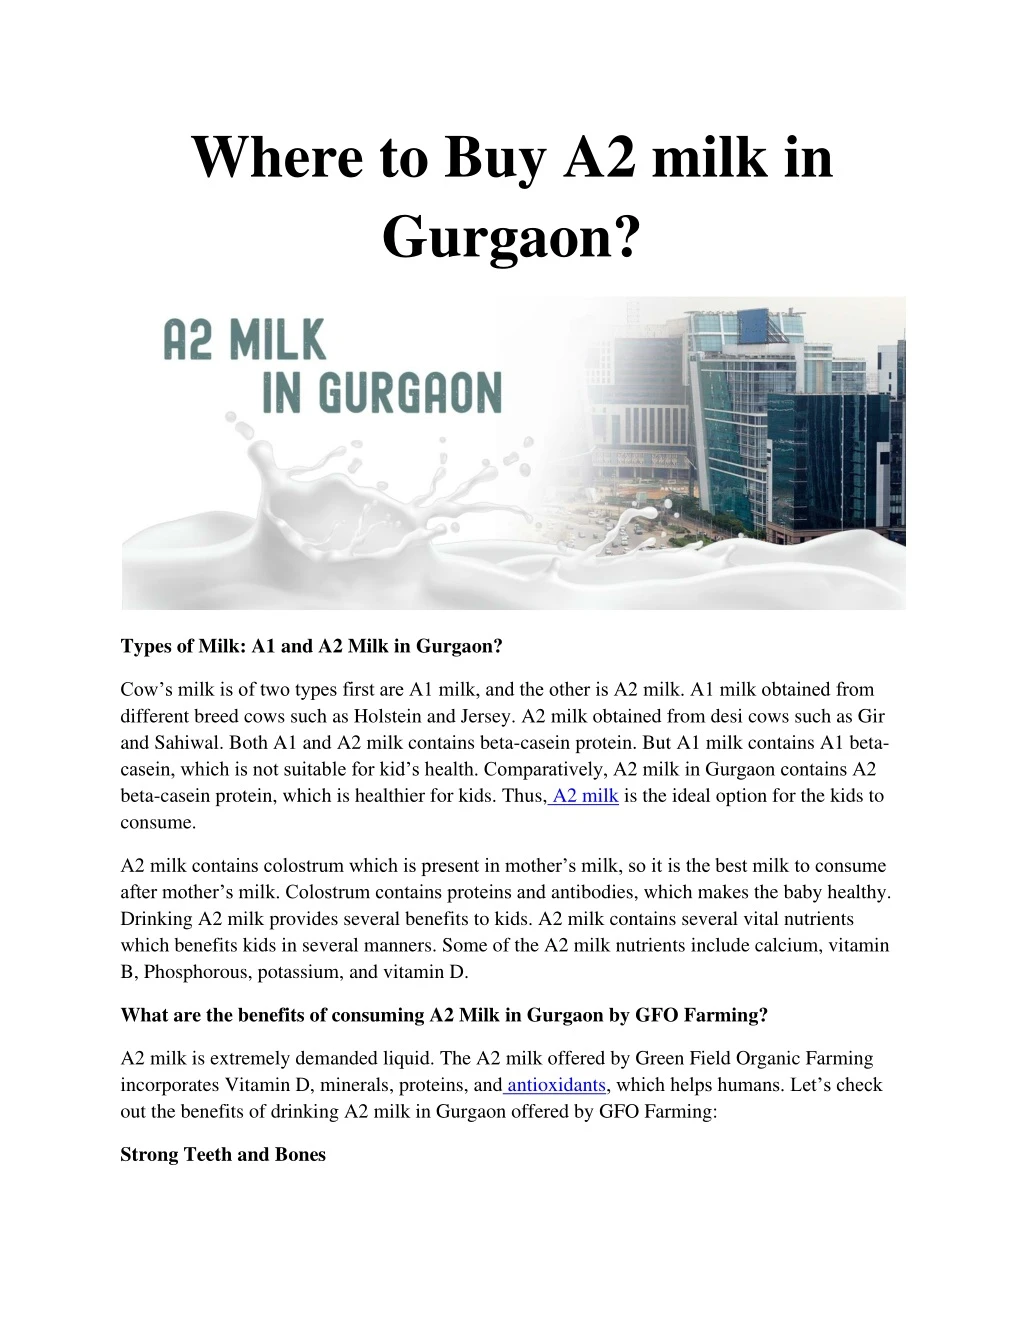 where to buy a2 milk in gurgaon